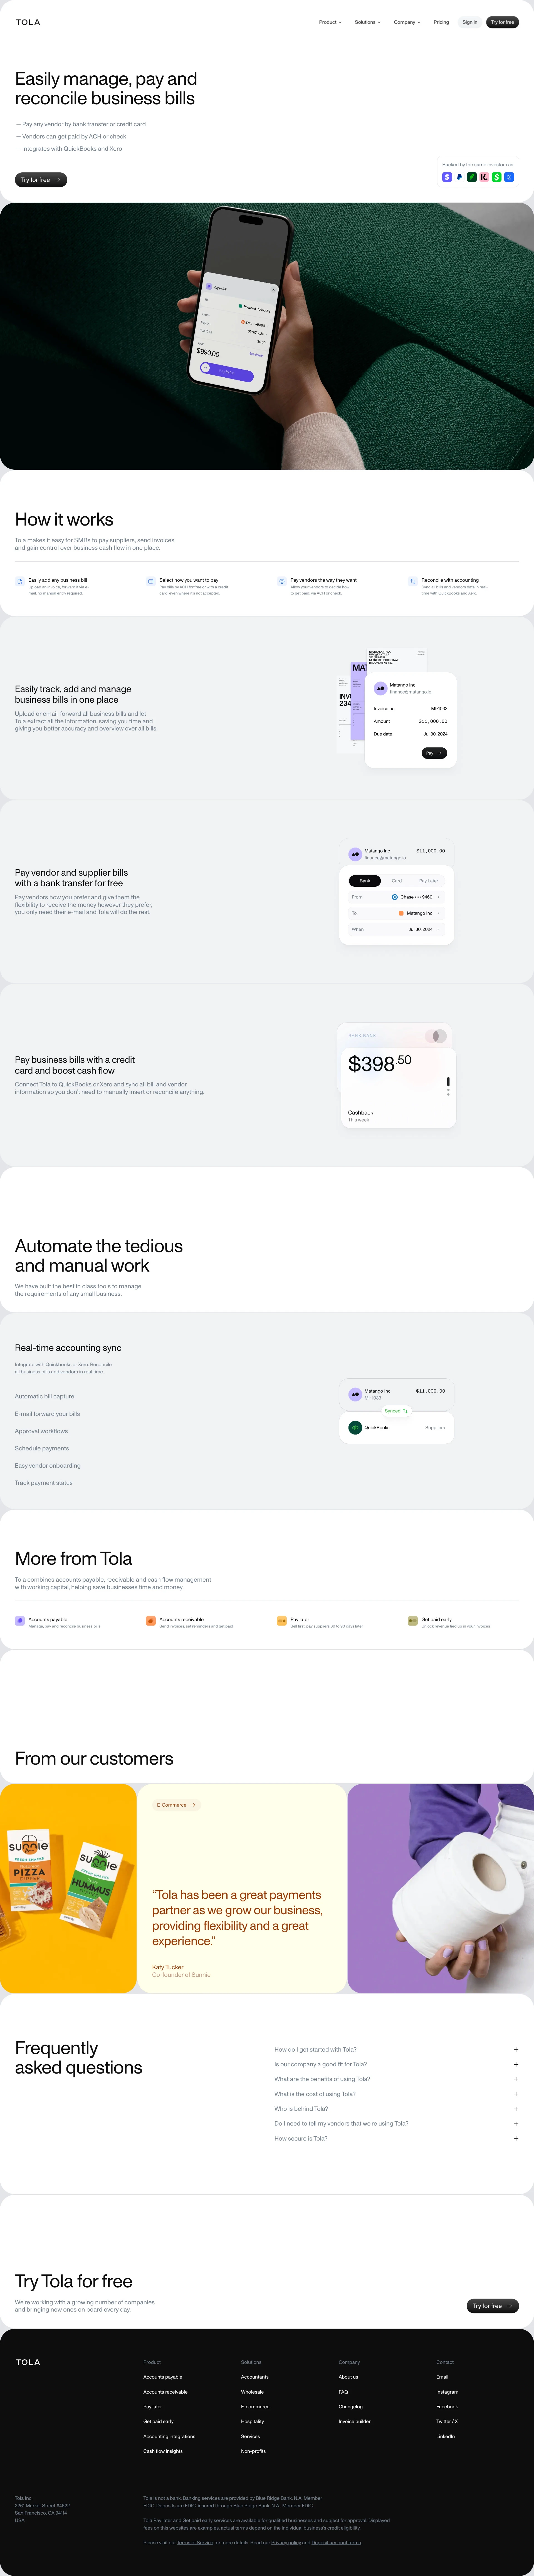 Tola Landing Page Example: Pay bills, get paid and manage cash flow. Tola combines accounts payable, receivable and cash flow management with working capital, helping save businesses time and money.